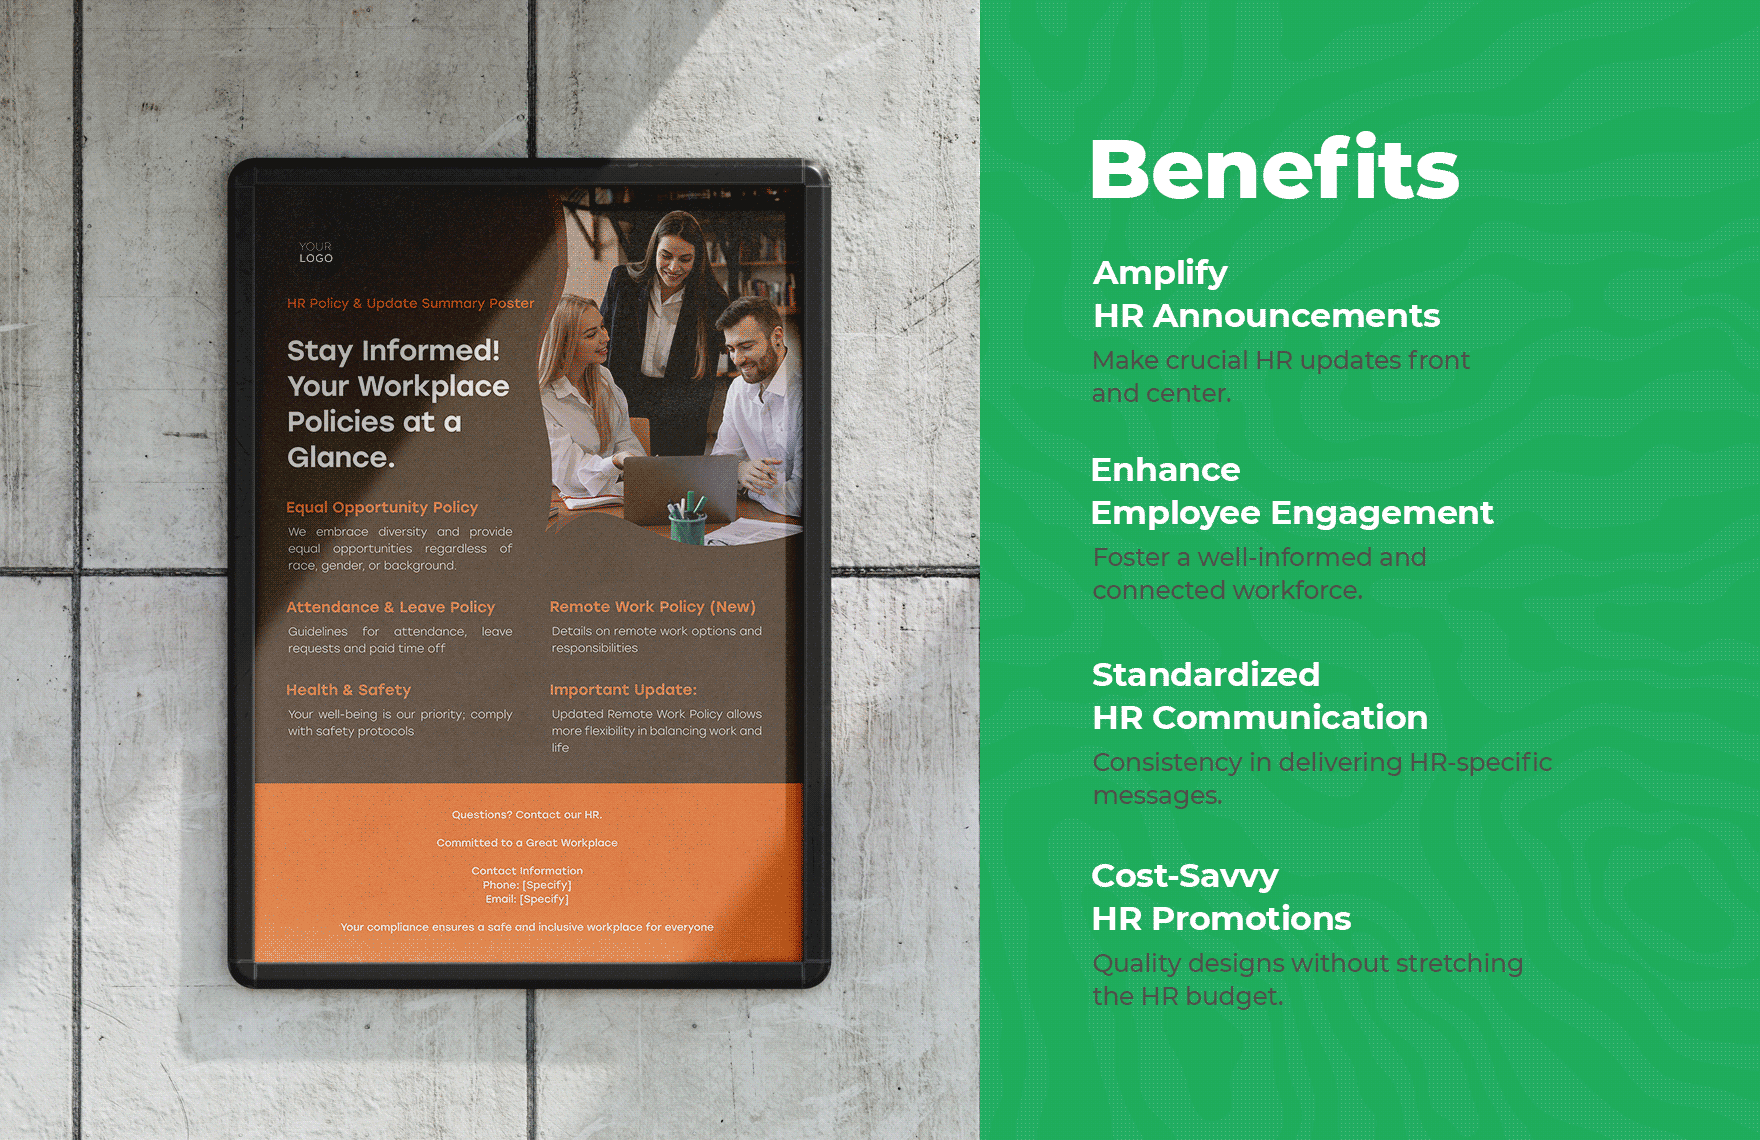 HR Policy and Update Summary Poster HR Template